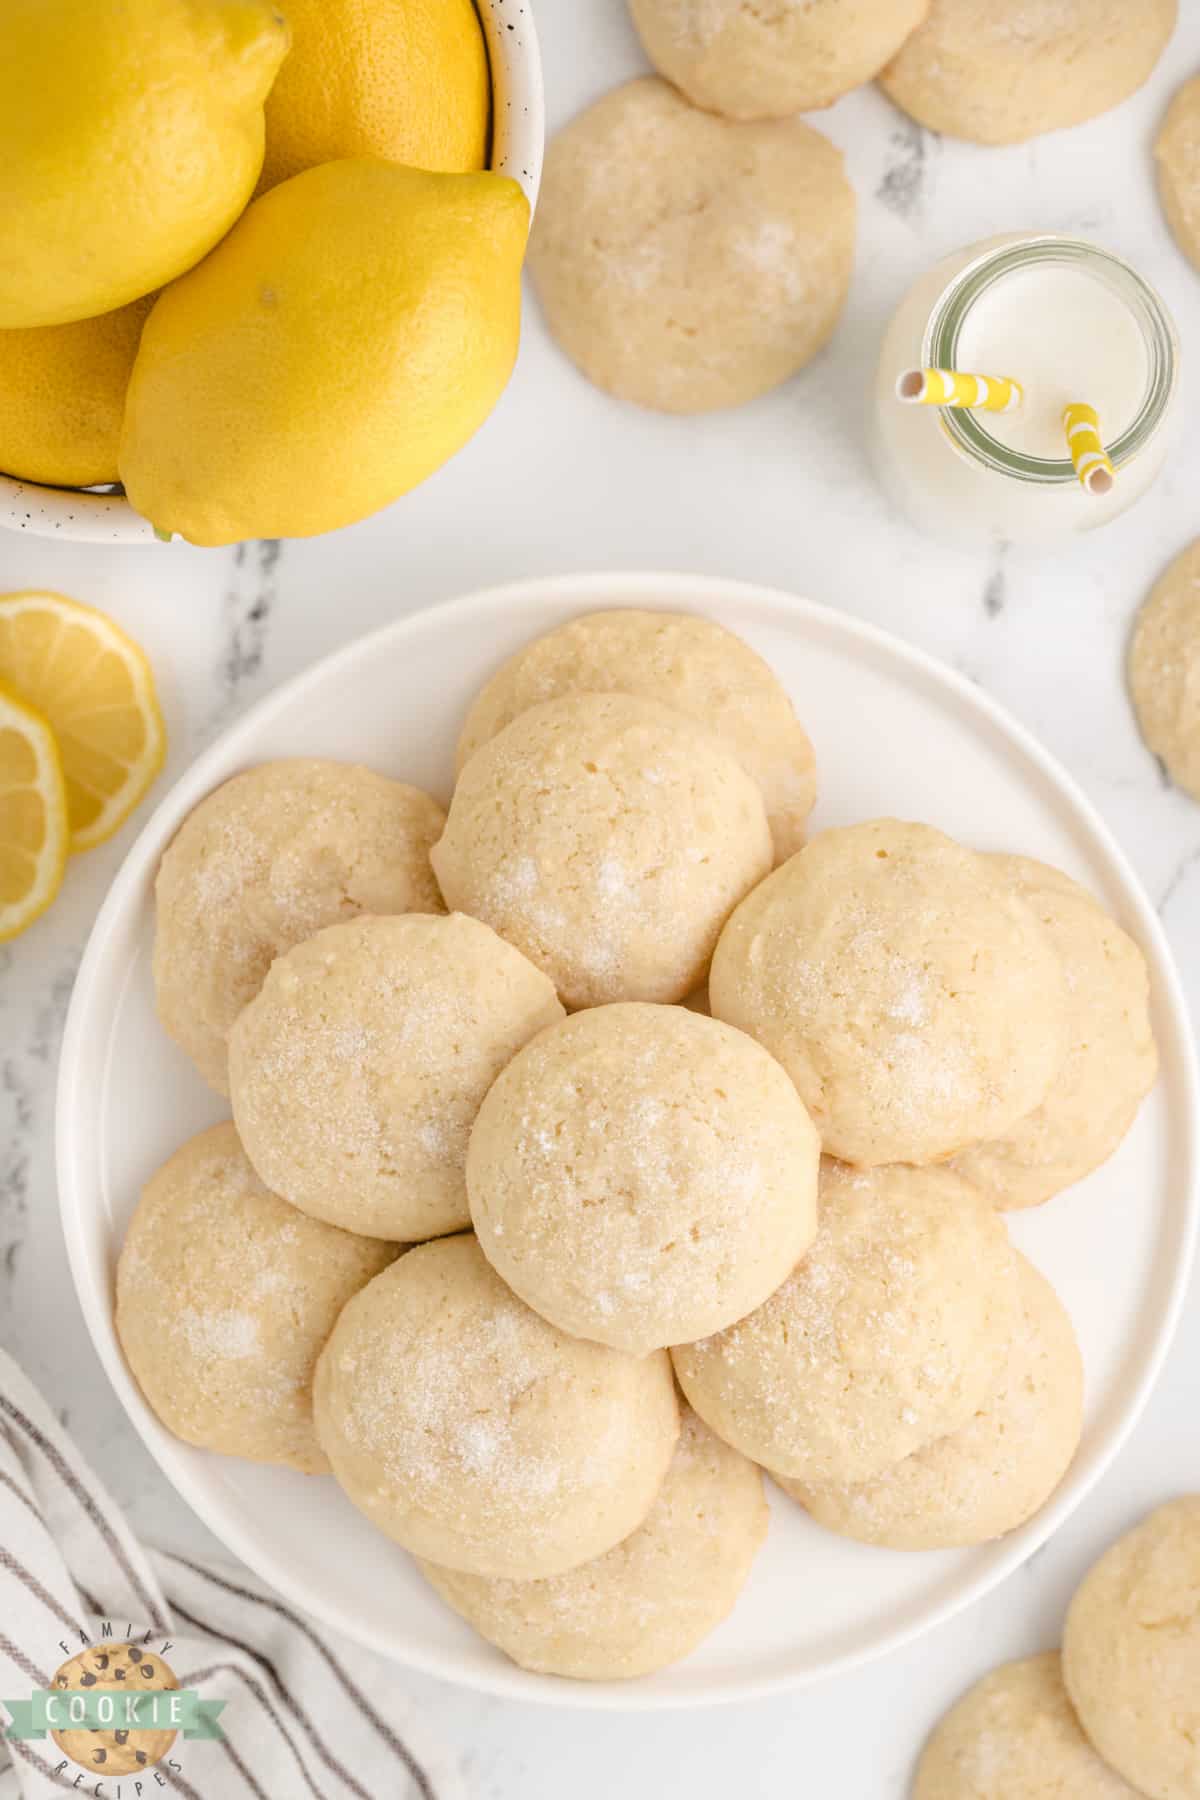 Easy Lemonade Cookies are soft, chewy and packed with lemon! These delicious lemon cookies are made with only 6 ingredients, one of them being lemonade concentrate.